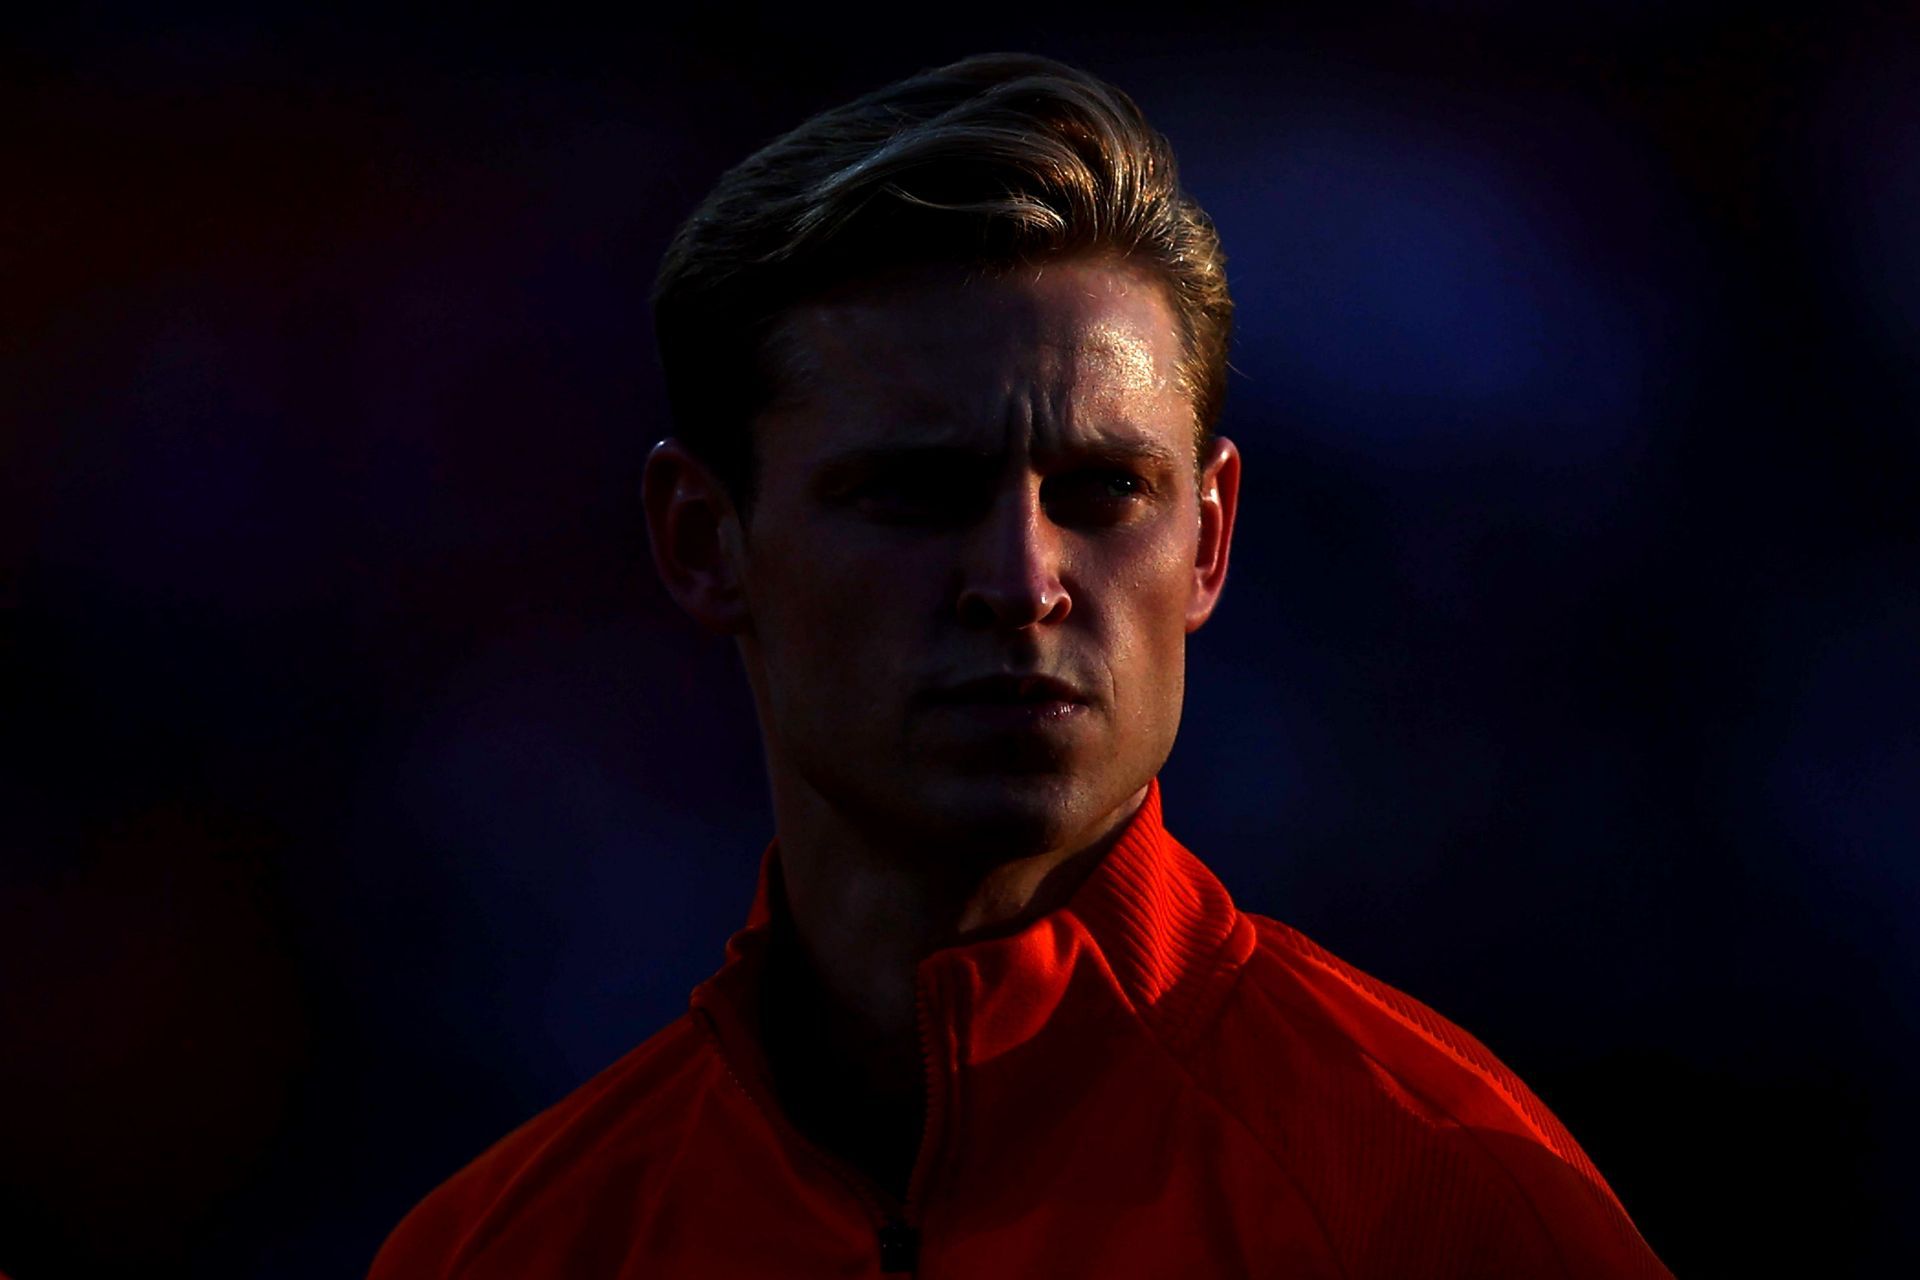 Frenkie de Jong is yet to make a move to Old Trafford.